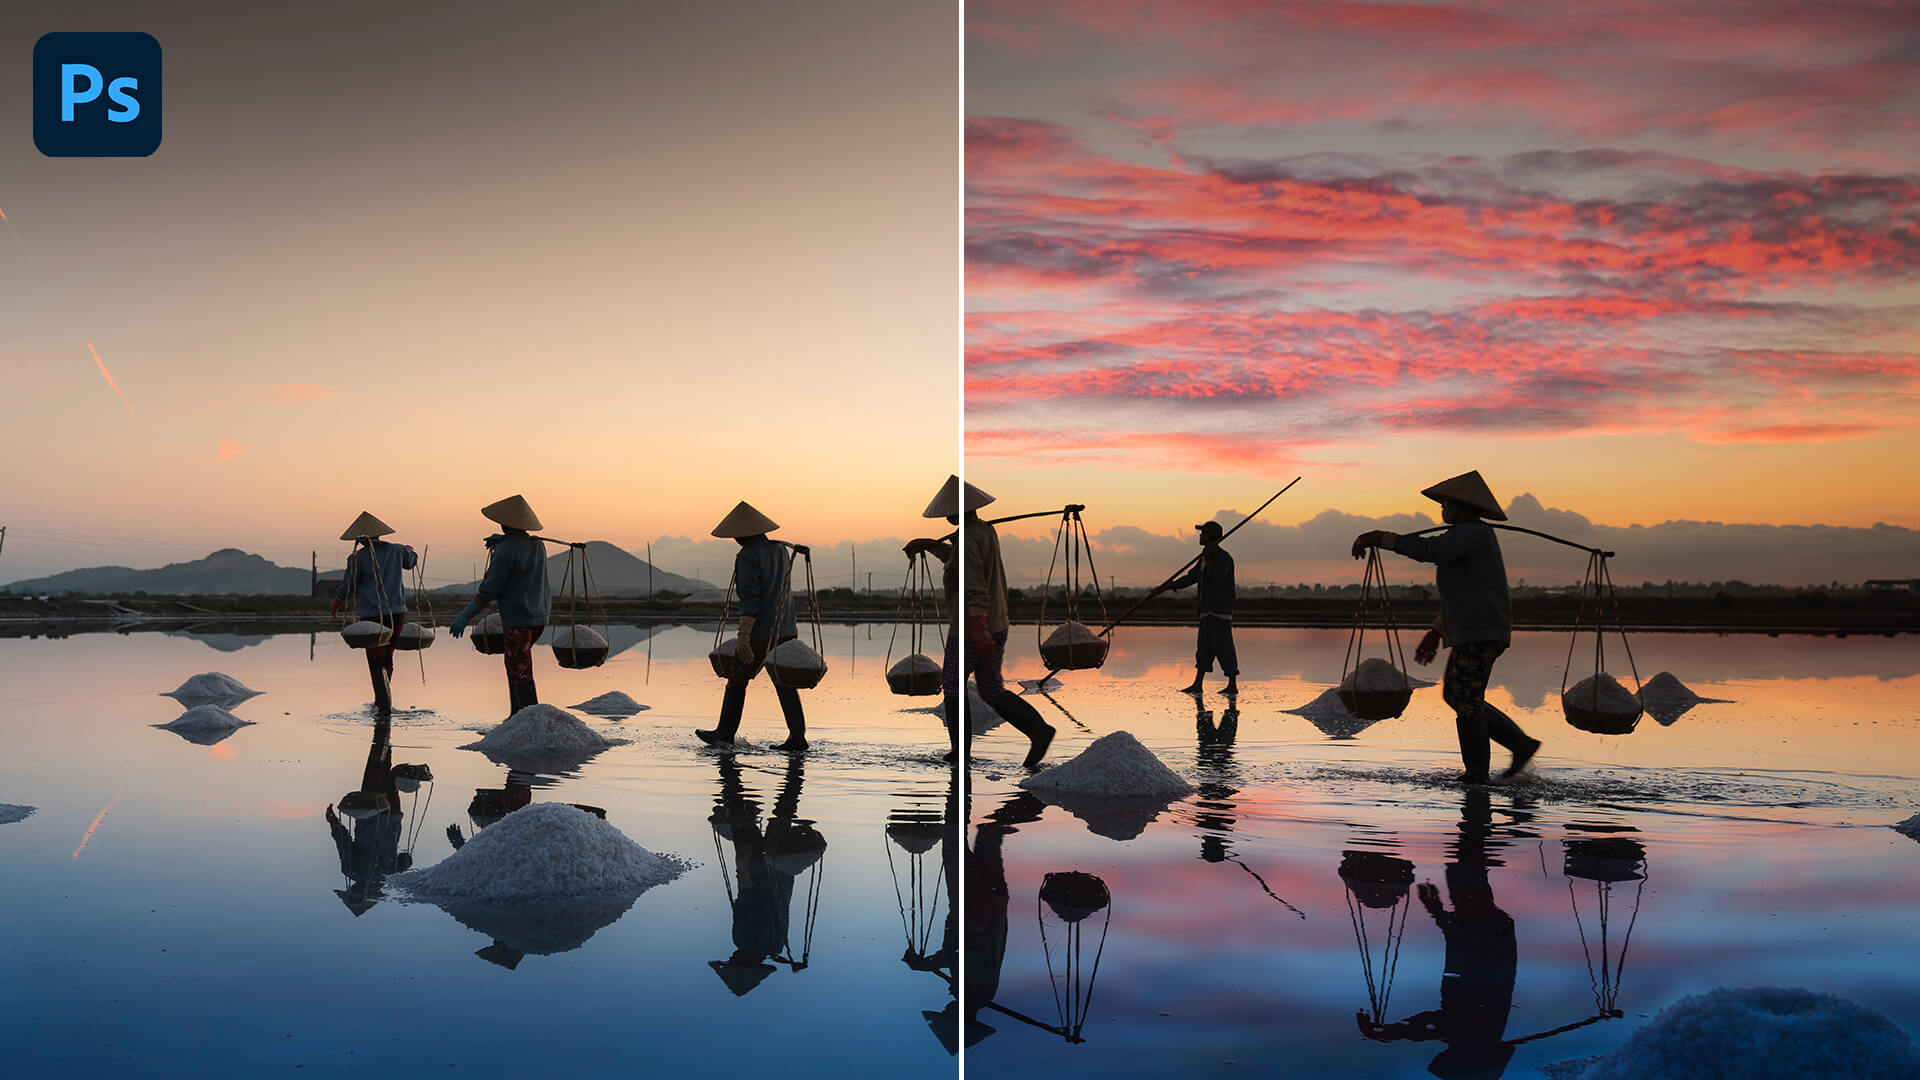 How to Change the Sky in Photoshop